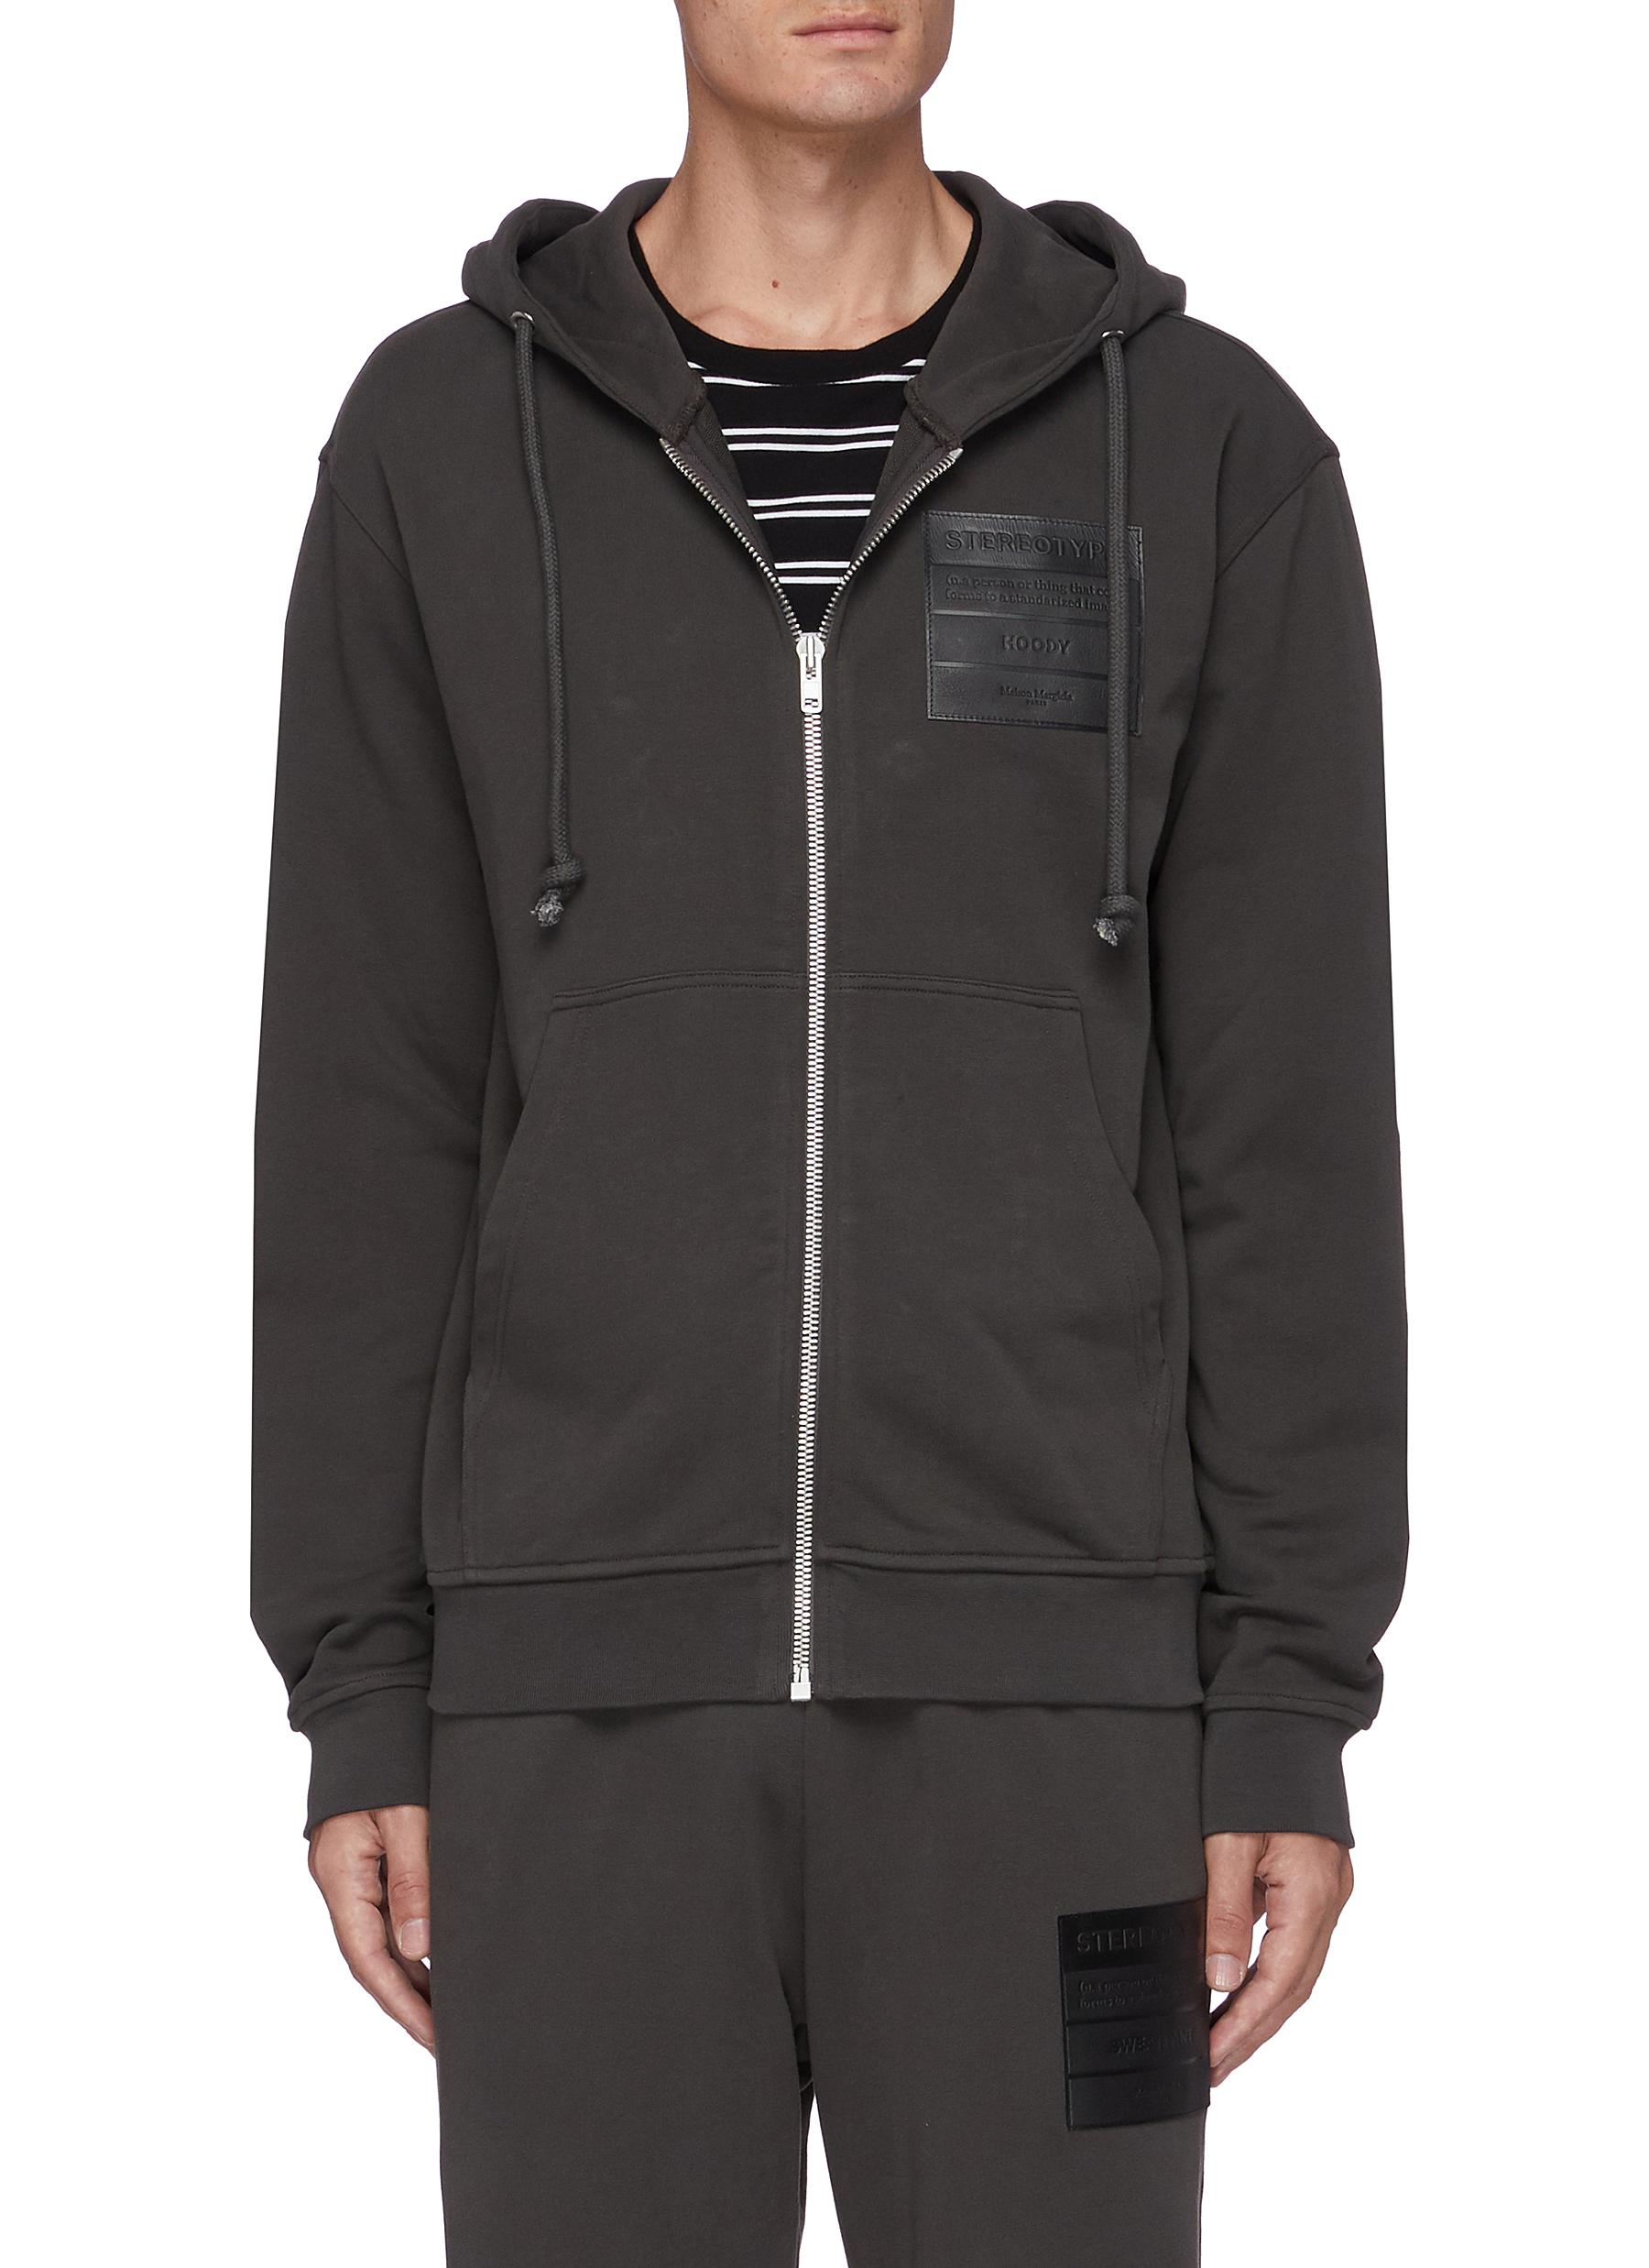 Stereotype logo patch zip front hoodie